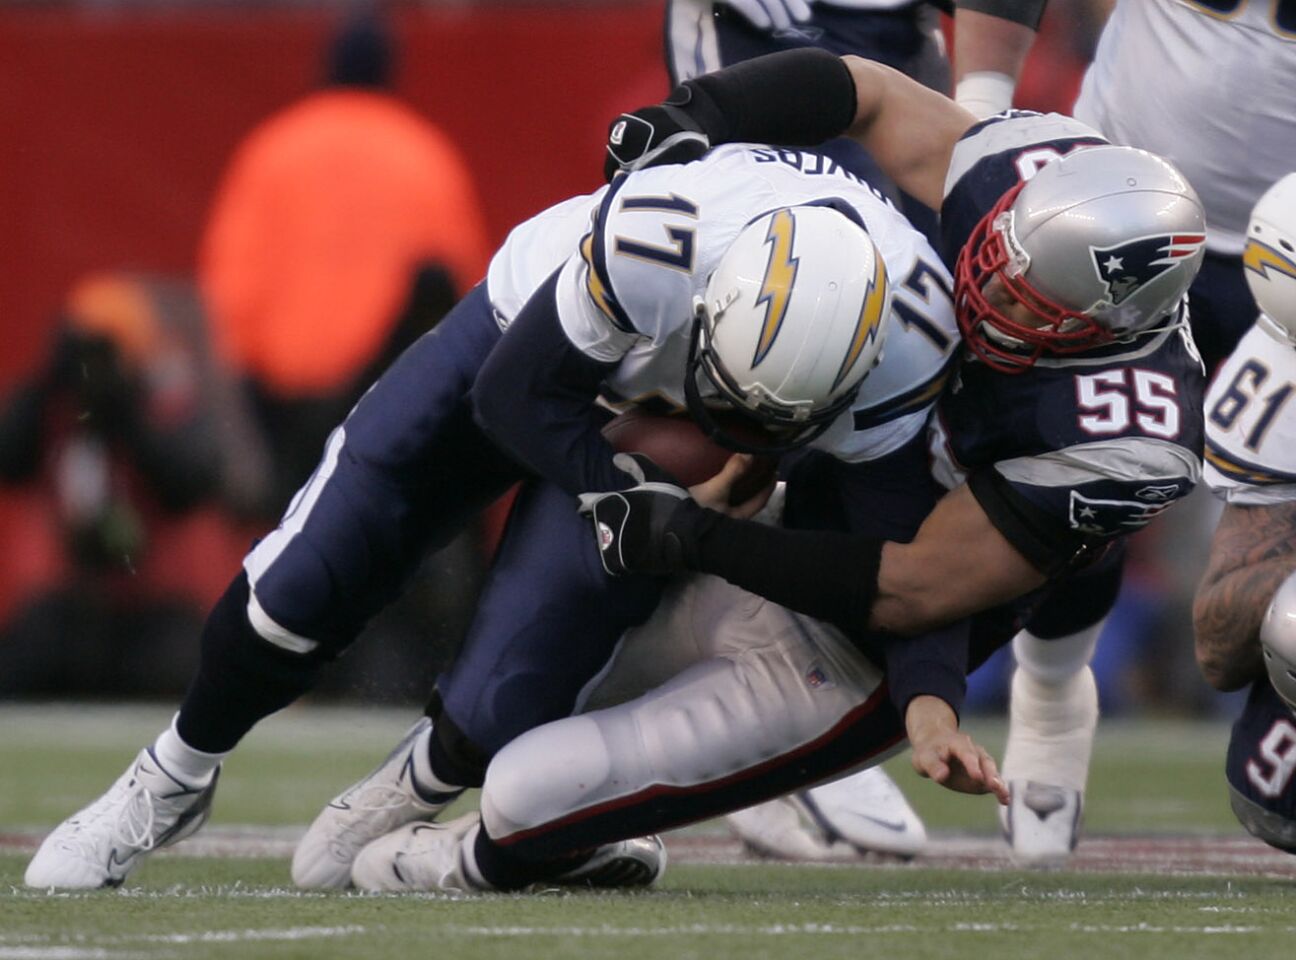 San Diego Chargers Philip Rivers is sacked by Junior Seau of the New England Patriots in the 1st qtr of the AFC Championship game on January 20, 2008 at Gillette Stadium in Foxborough.